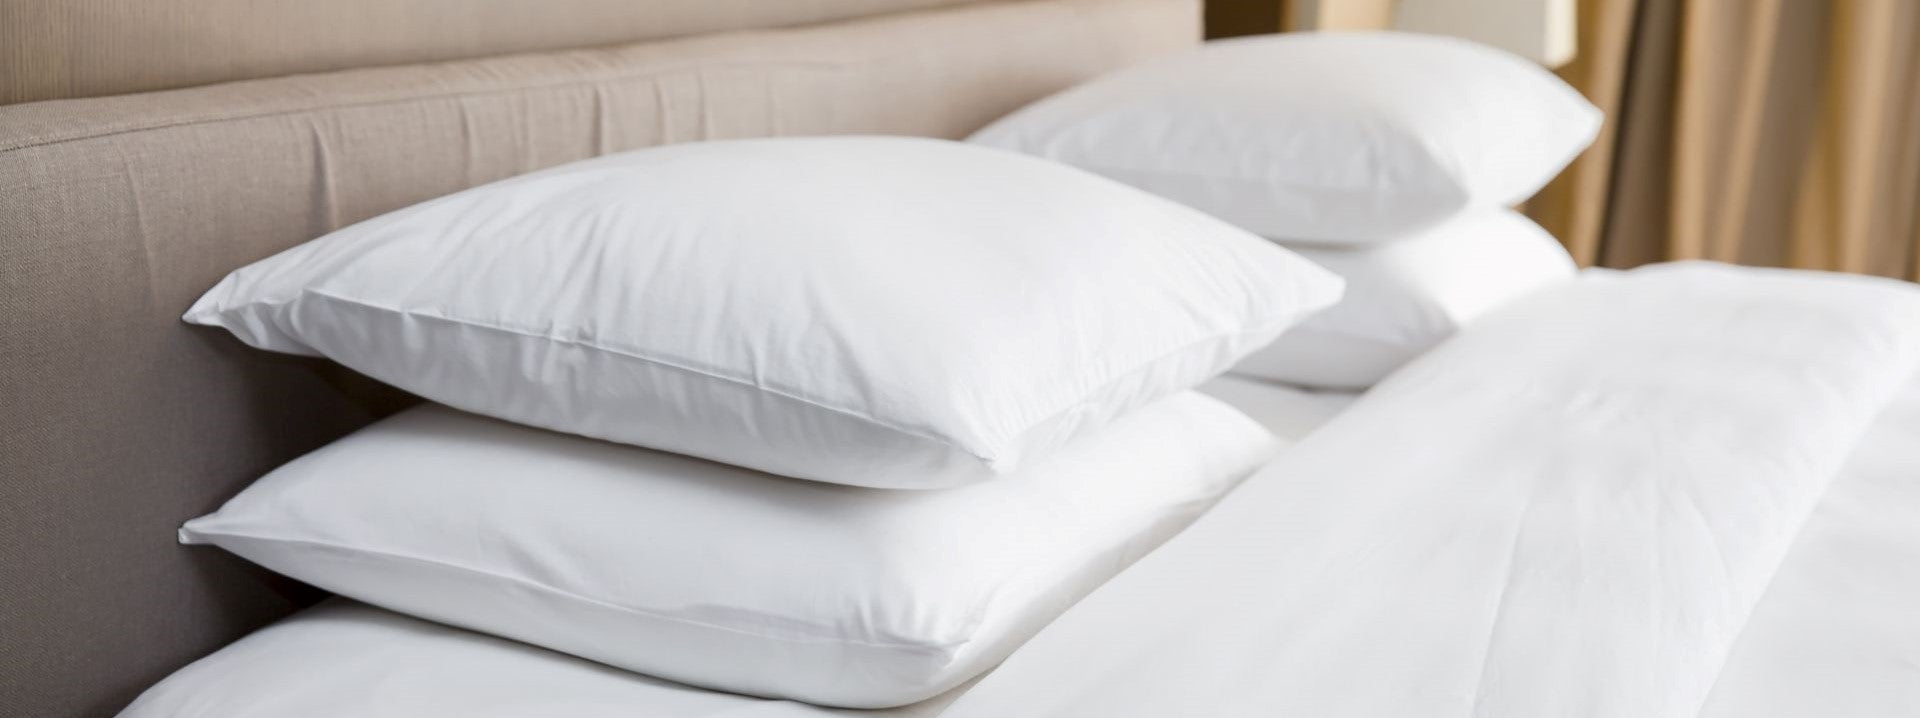 extra large pillowcases